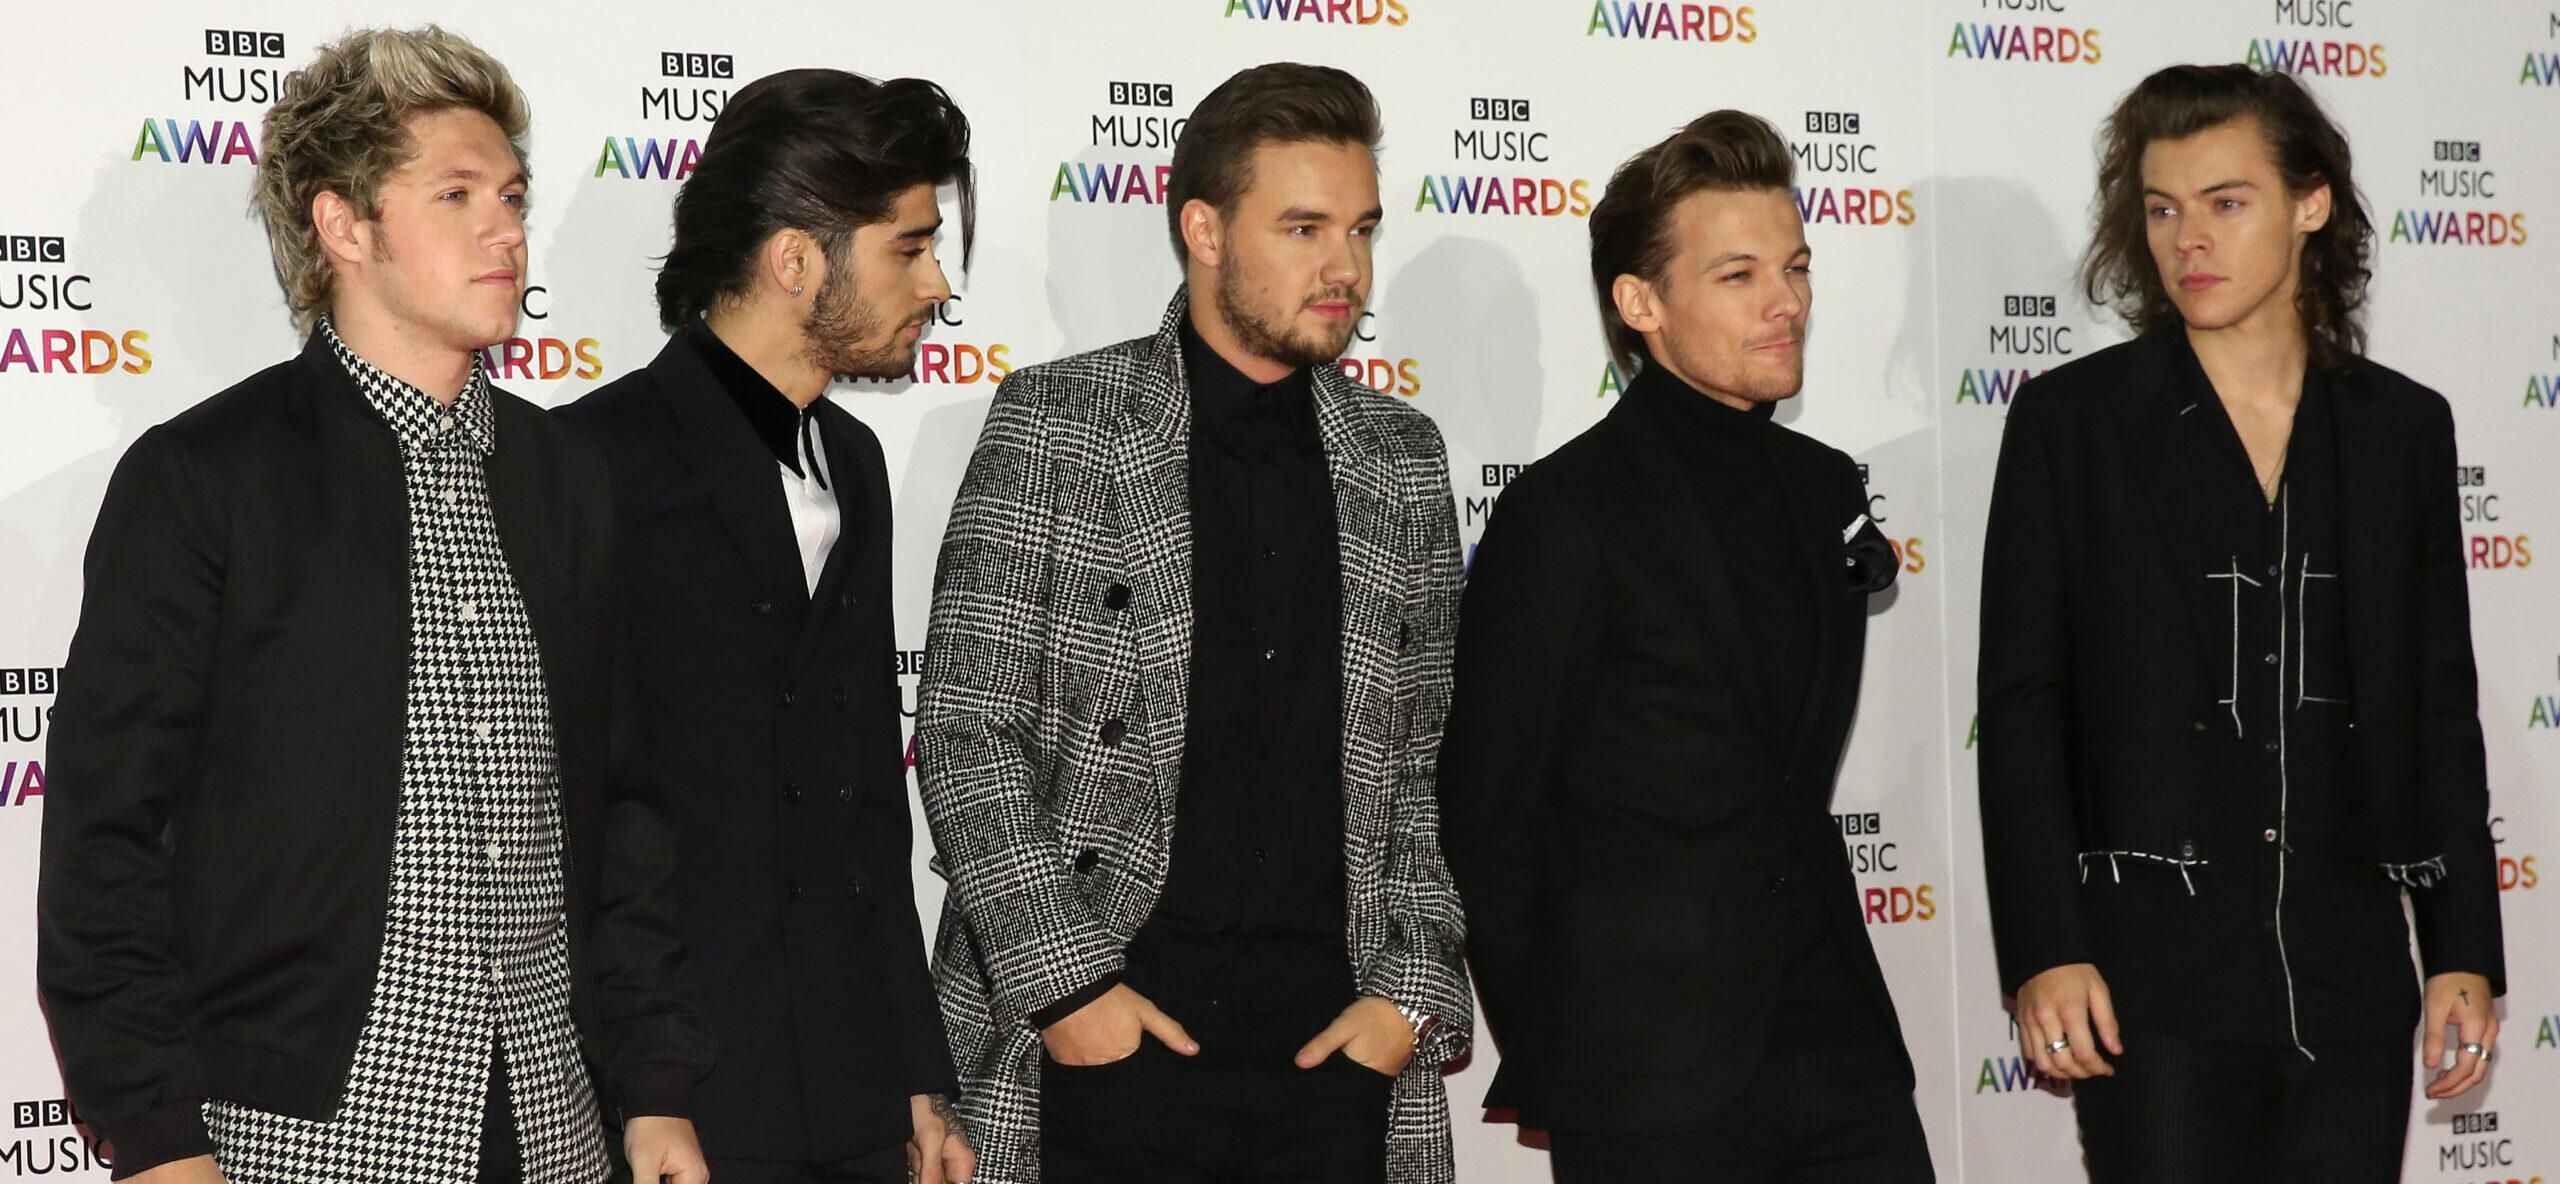 Liam Payne Wants To 'Make Amends' For Past Comments Bashing One Direction